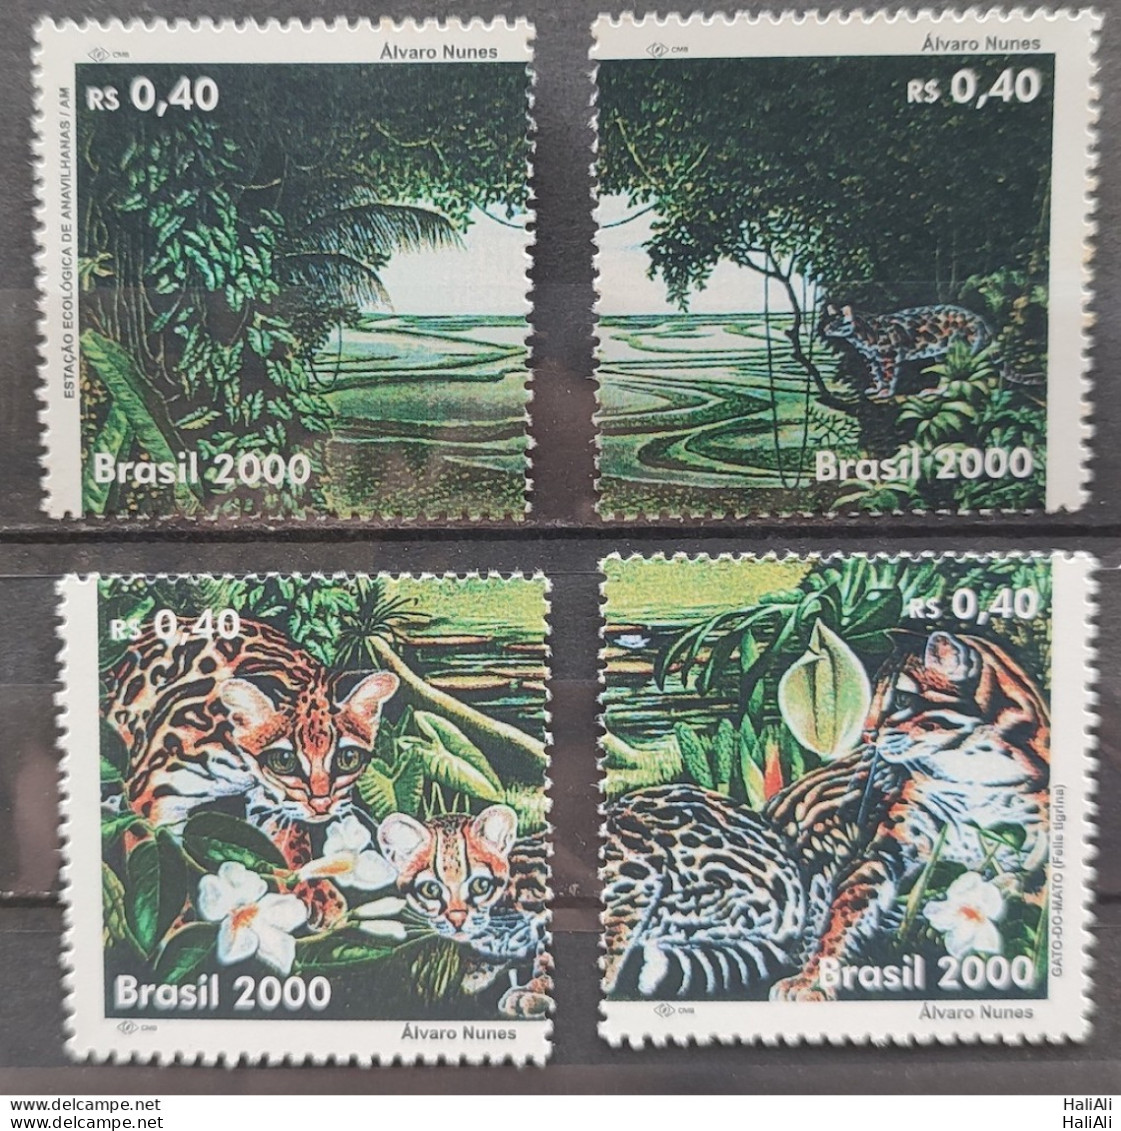 C 2285 Brazil Stamp Preservation Of The Environment Expo Cat Jaguar 2000 Complete Series Separate - Nuovi